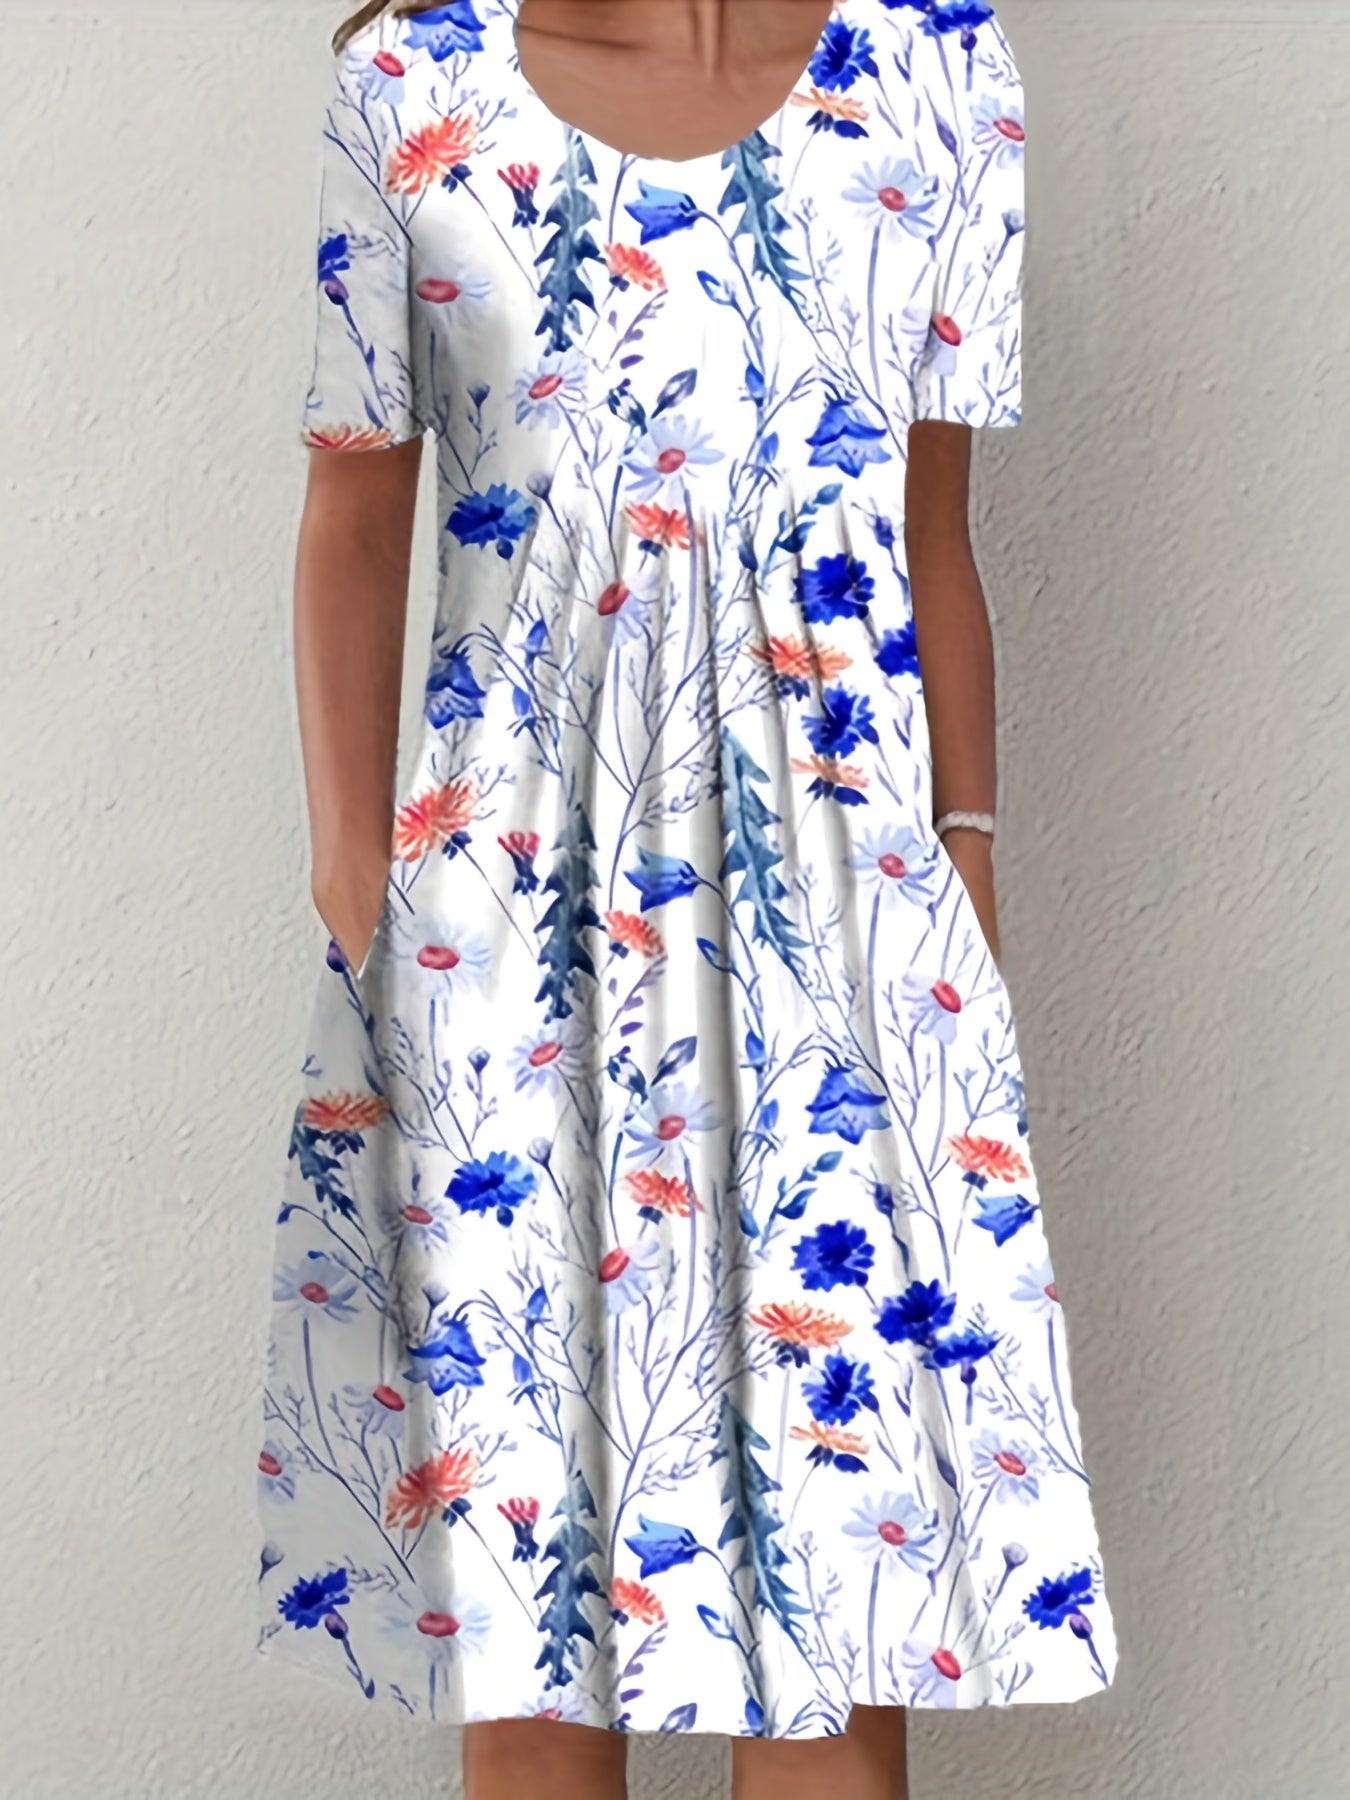 「lovevop」Full Printed Ruched Dress, Casual Crew Neck Short Sleeve Dress, Women's Clothing